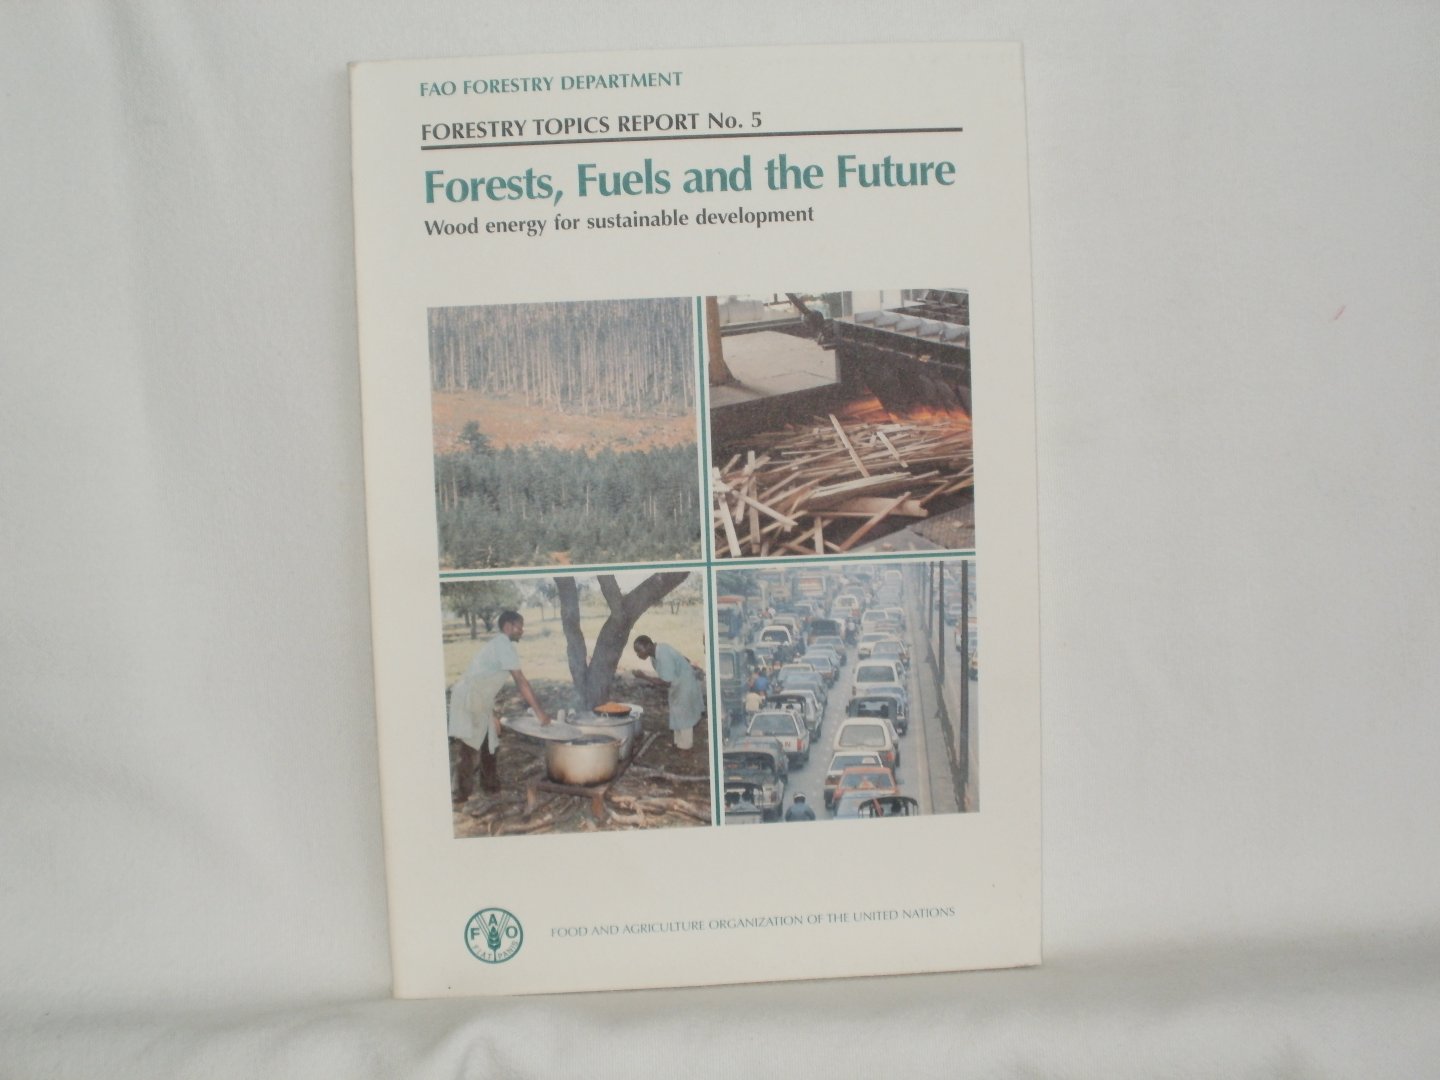 Lamb, Robert - Forests, Fuels and the Future. Wood energy for sustainable development. Forestry Topics Report no. 5